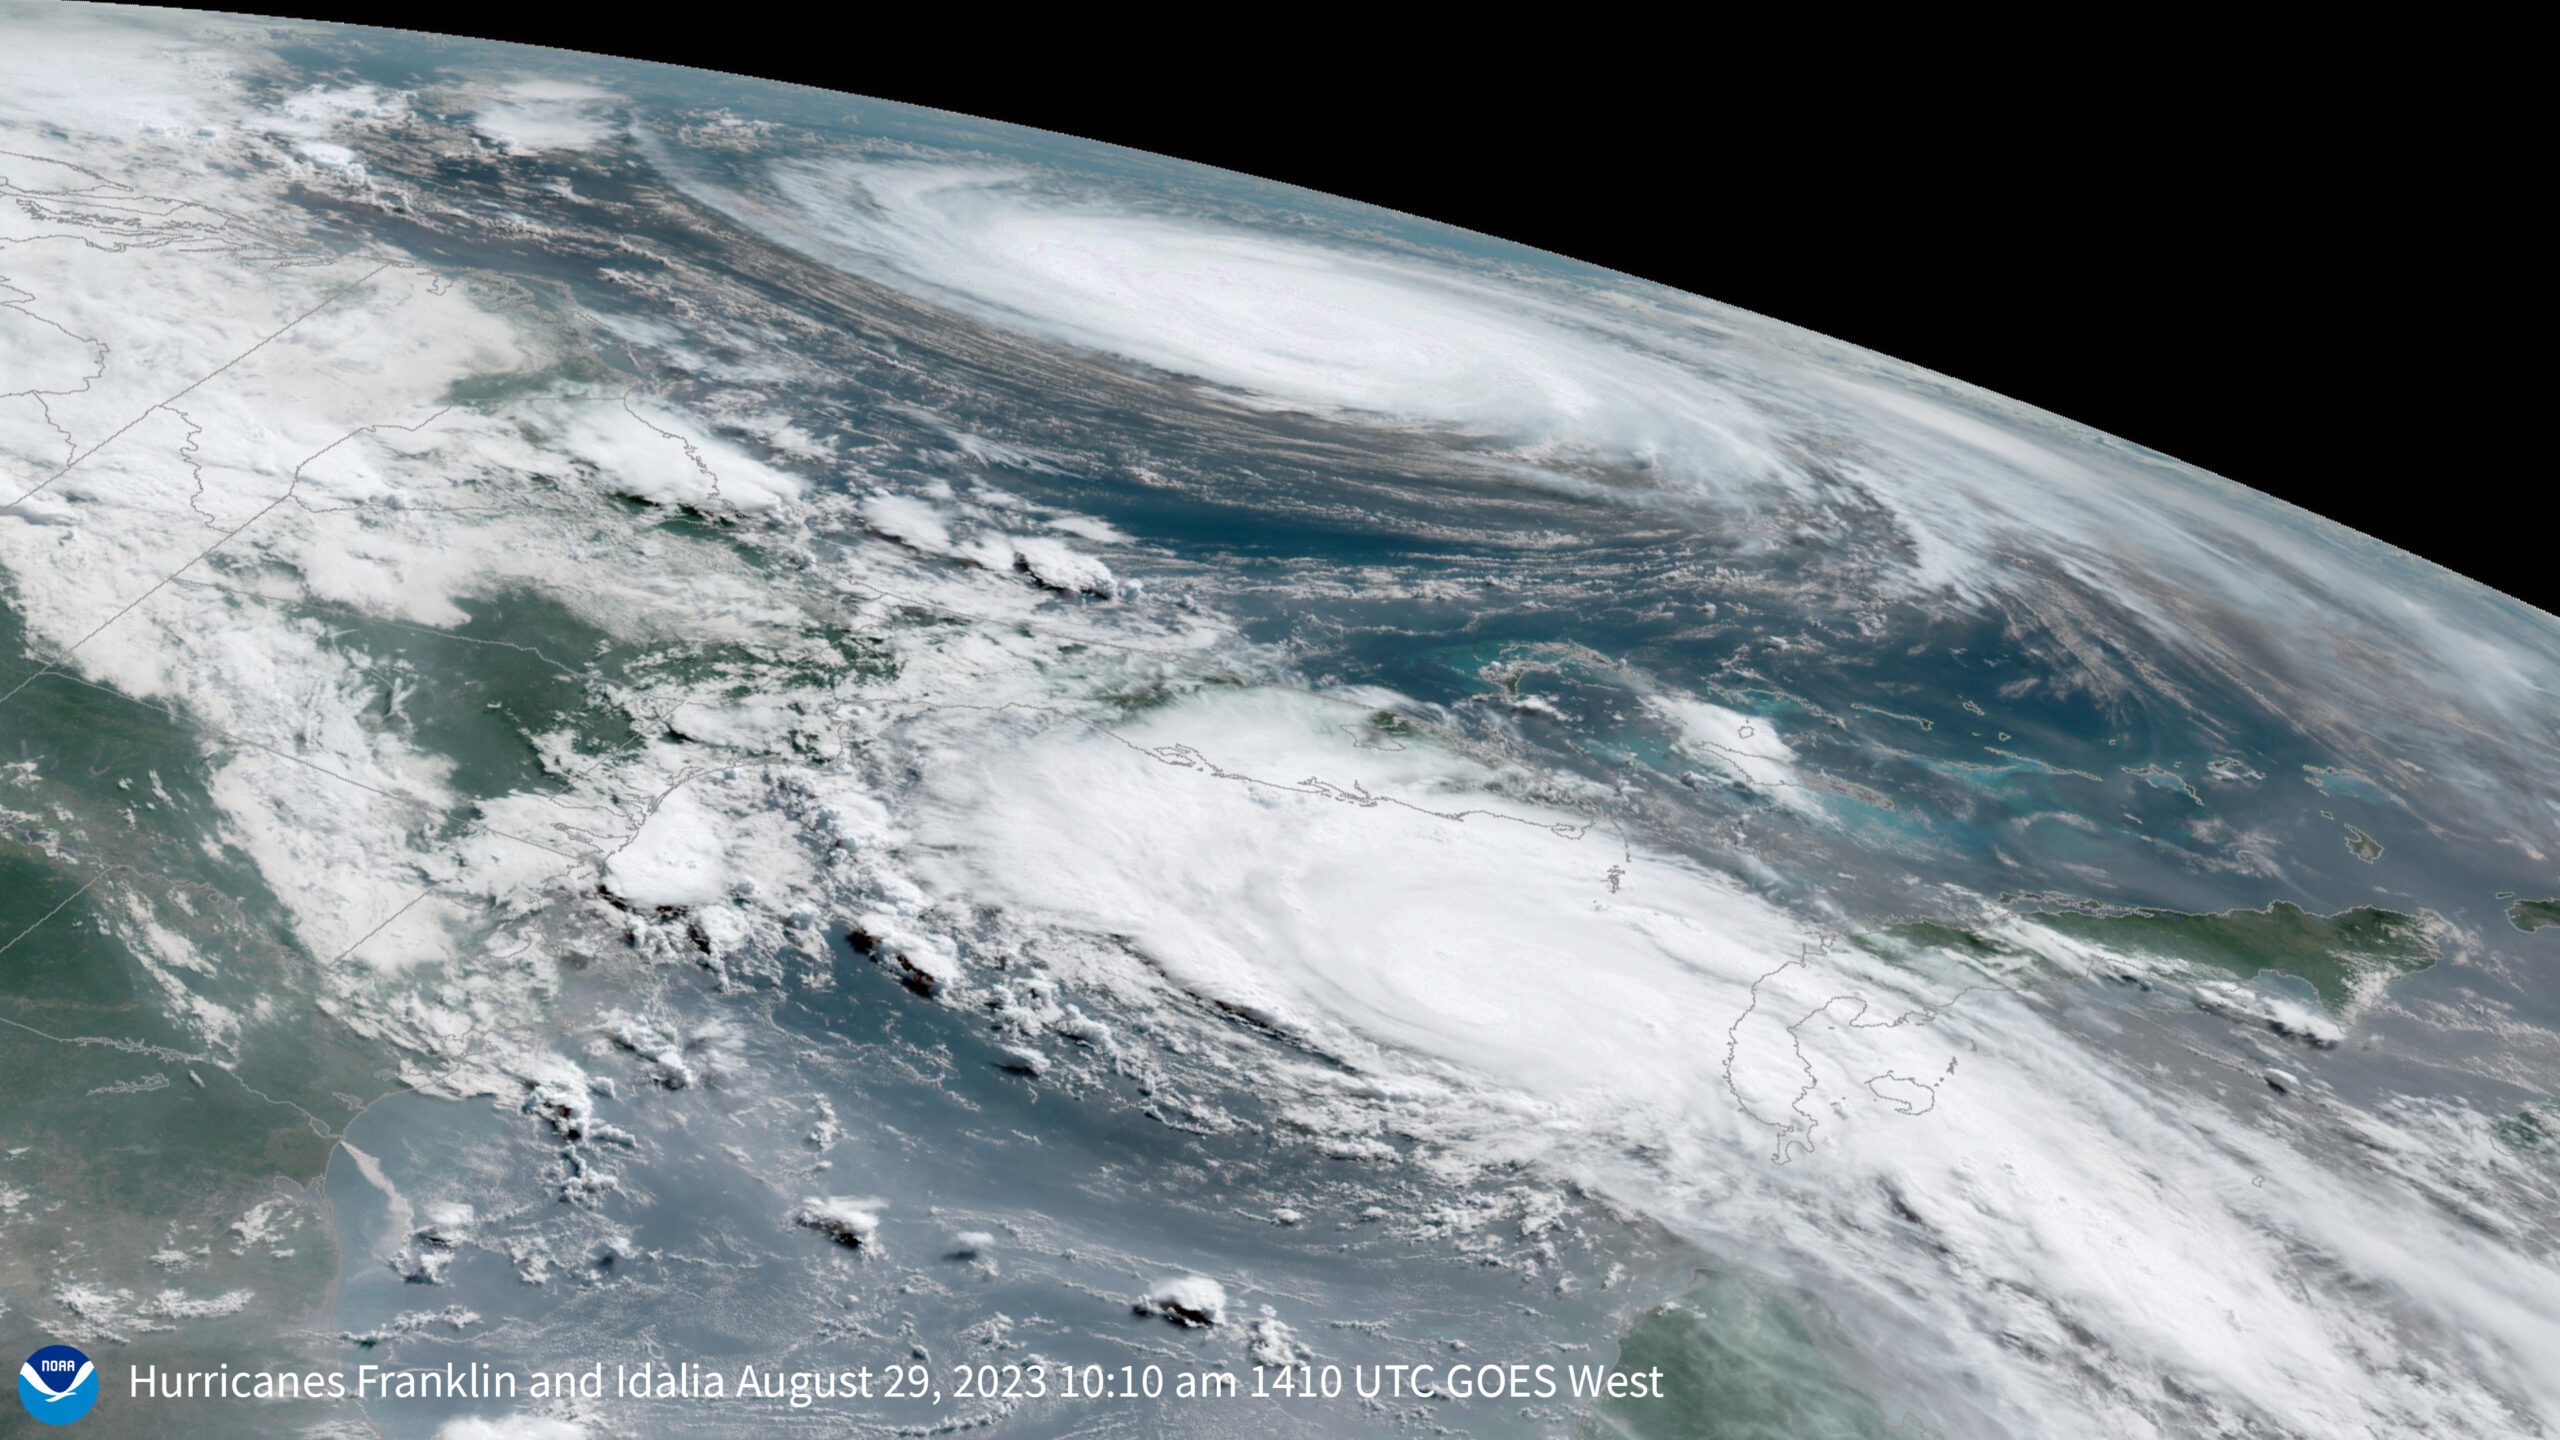 Hurricanes Idalia and Franklin captured by NOAA's GOES West satellite, August 29, 2023. Photo: NOAA